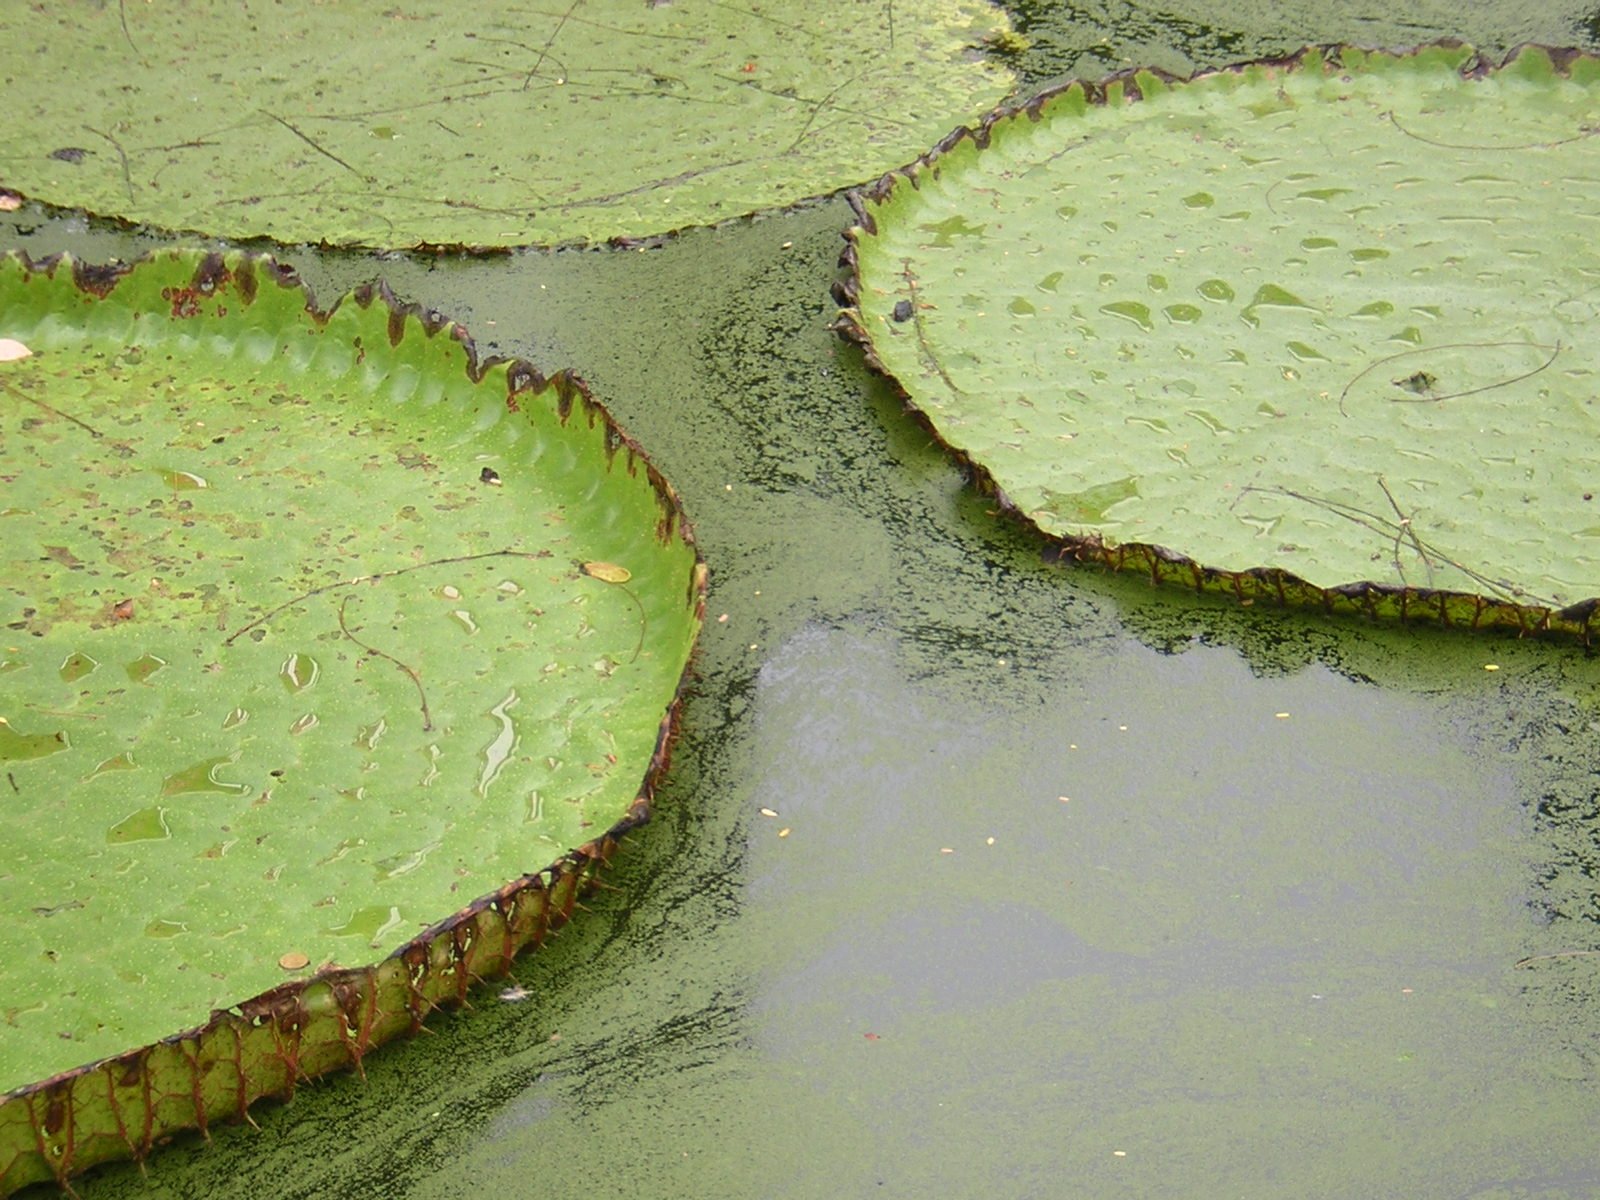 lily pads are shown in this pograph, as well as a birdbath